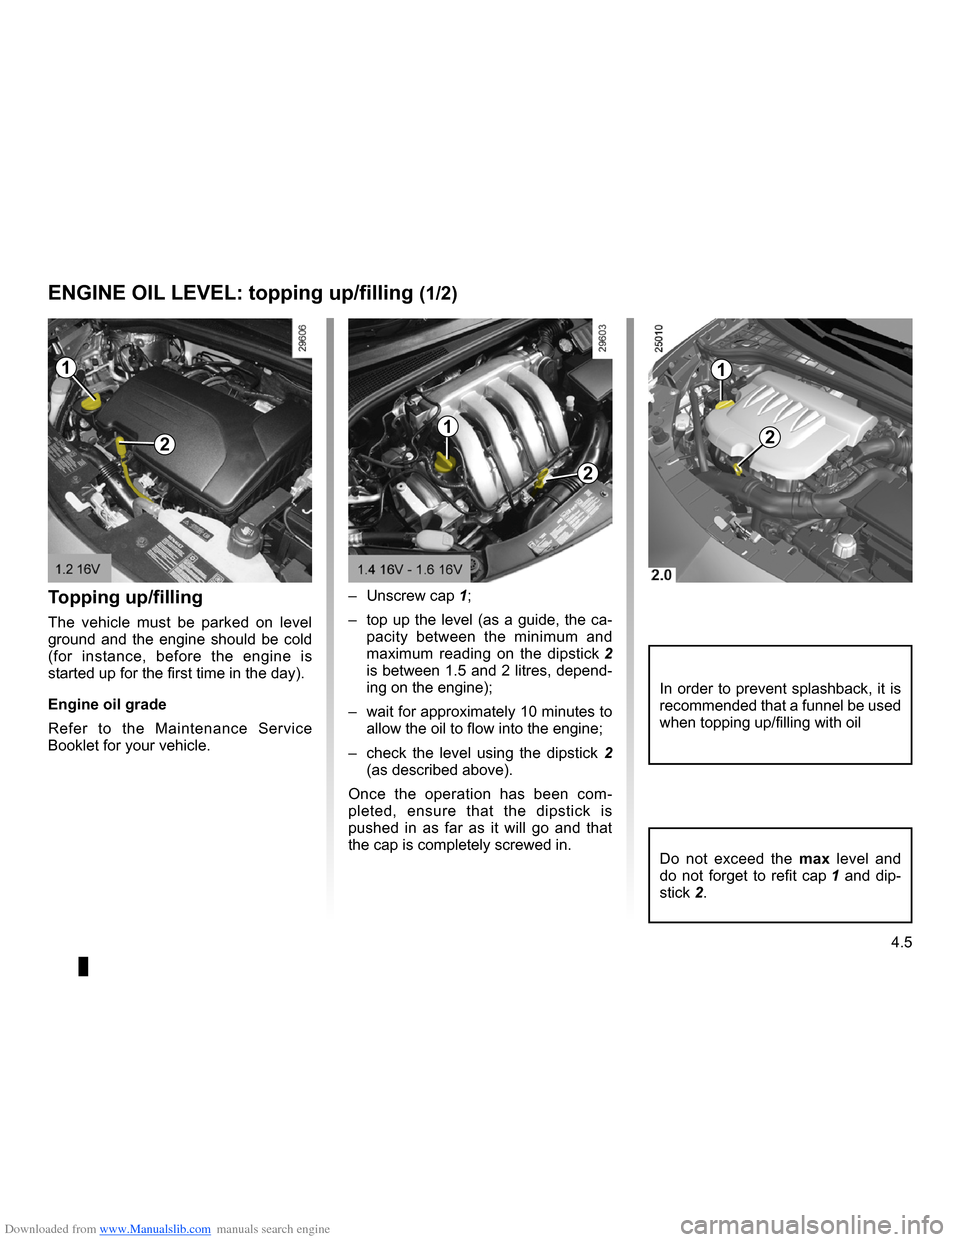 RENAULT CLIO 2009 X85 / 3.G Owners Manual Downloaded from www.Manualslib.com manuals search engine 
4.5
ENG_UD12586_2Niveau huile moteur : appoint/remplissage (X85 - B85 - C85 - S85 - K85 \
- Renault)ENG_NU_853-3_BCSK85_Renault_4
Engine oil l